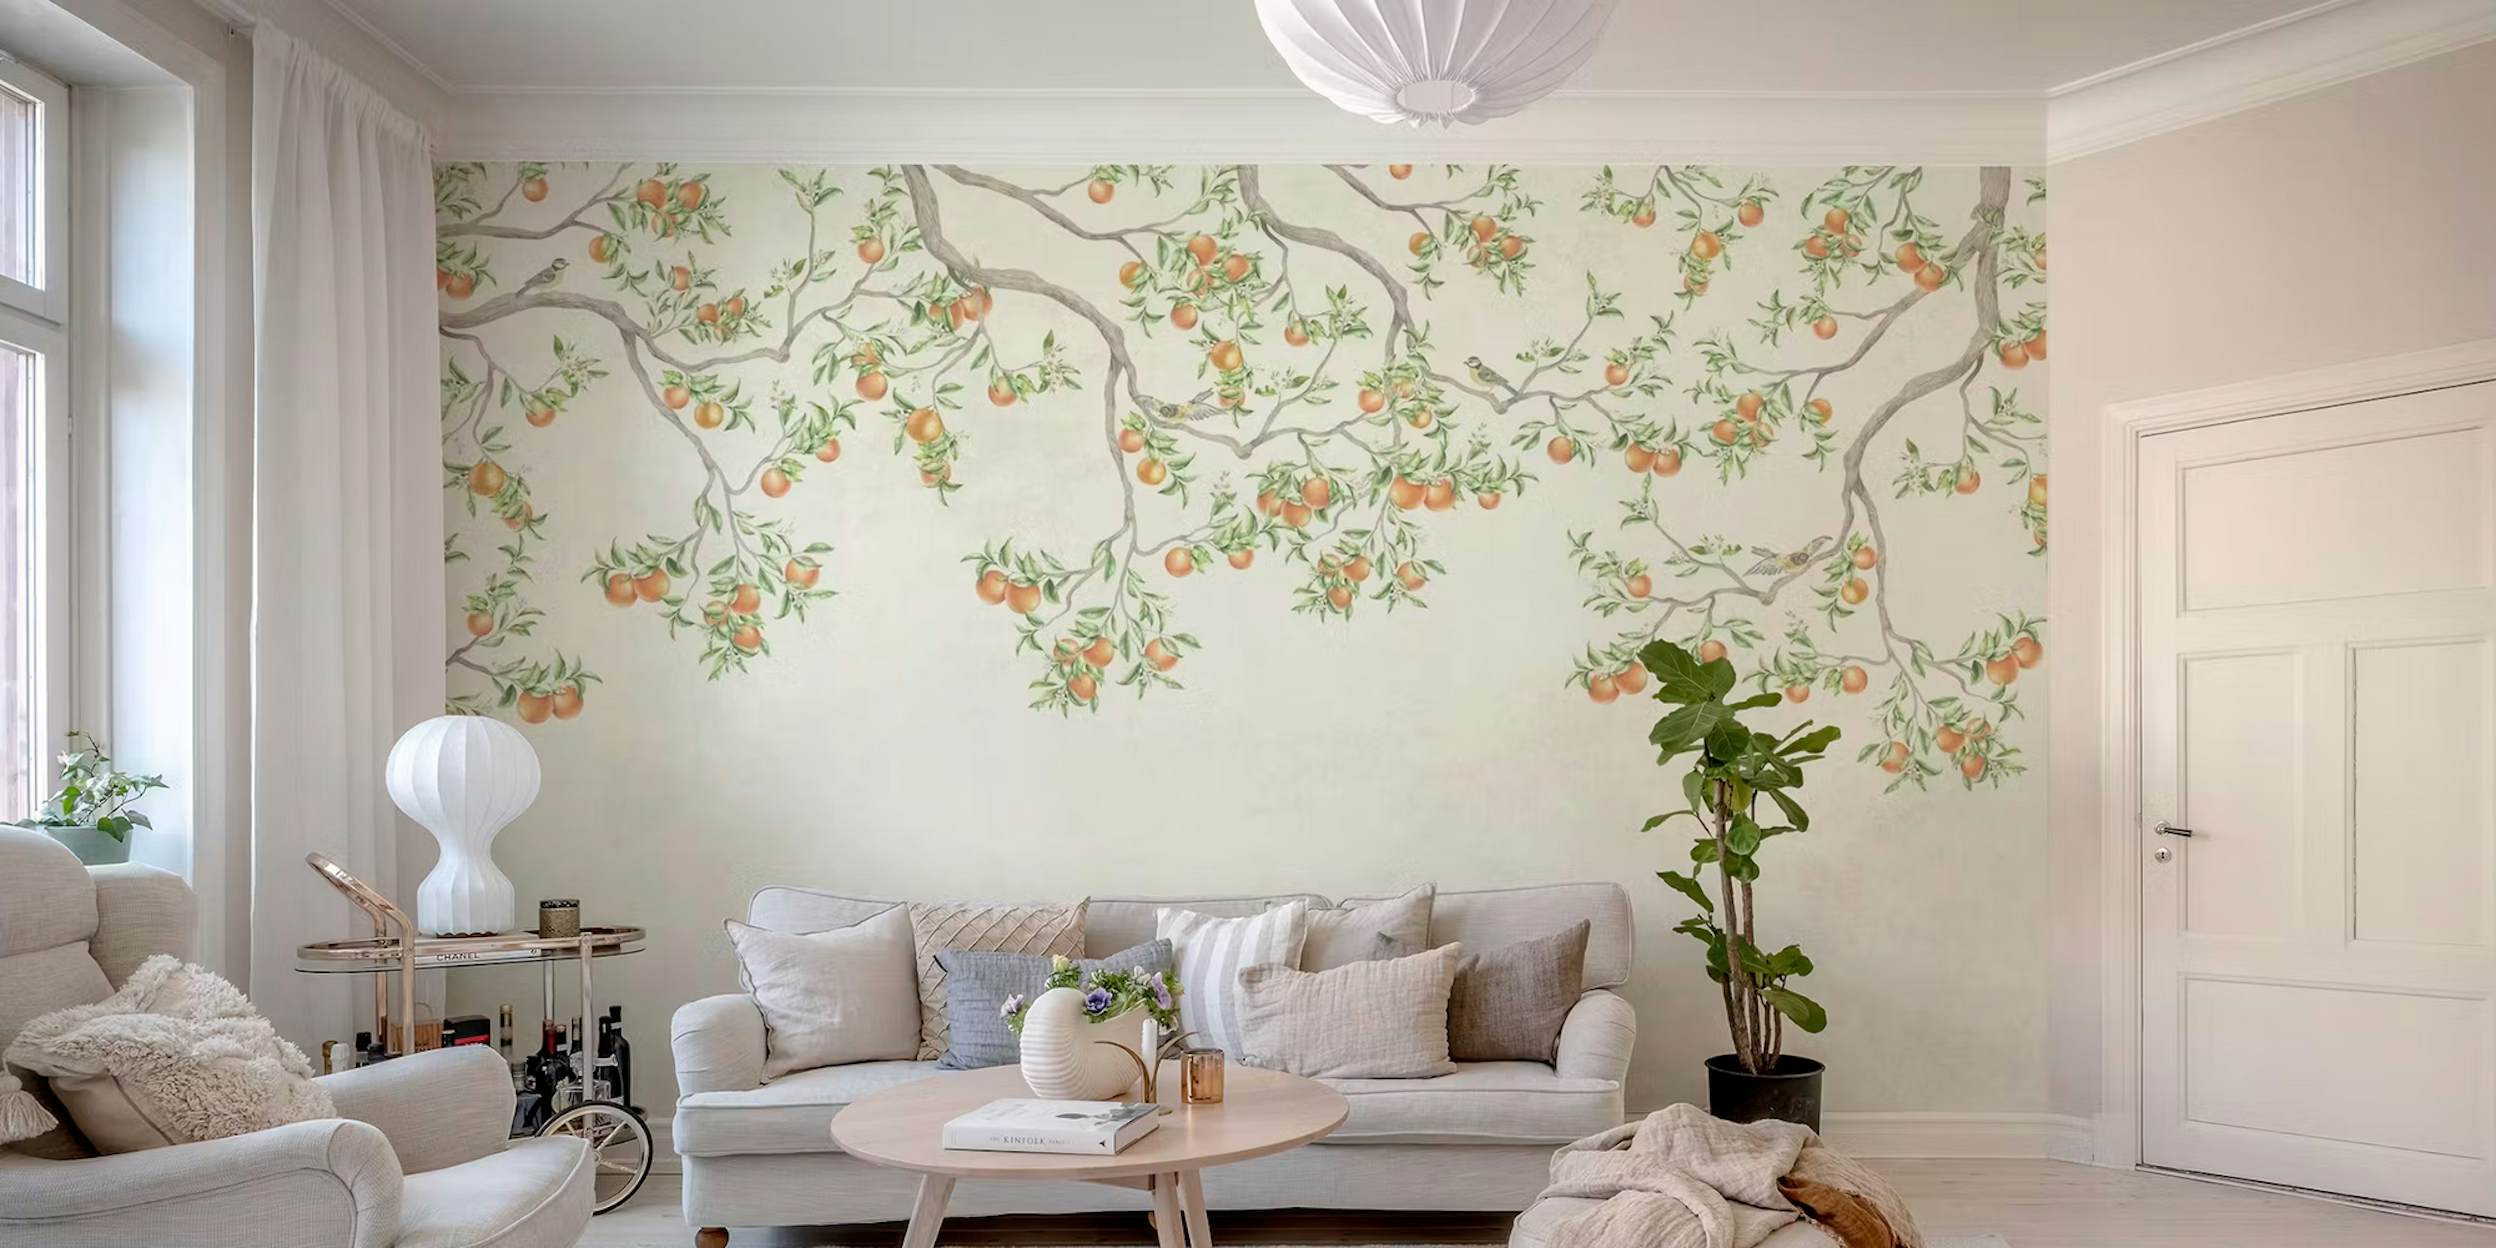 Wallpaper Designs For Every Room In Home